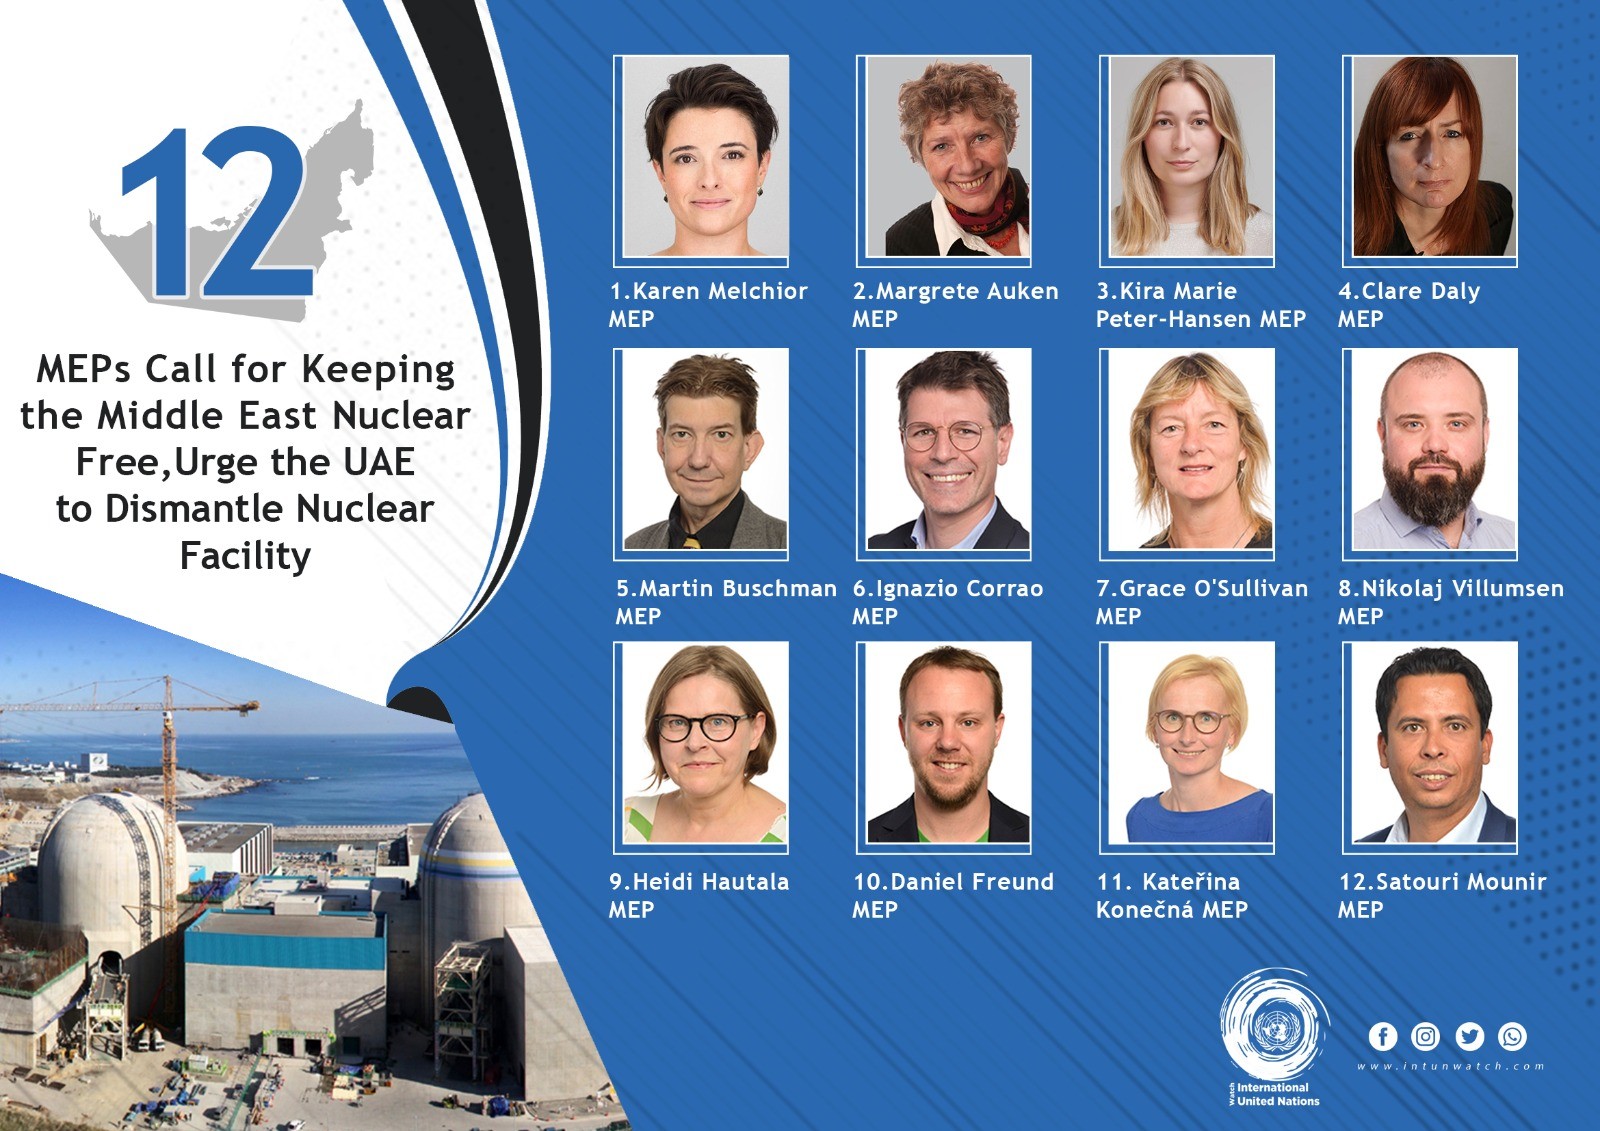  13 EU MEPs Call for Nuclear-Free Middle East